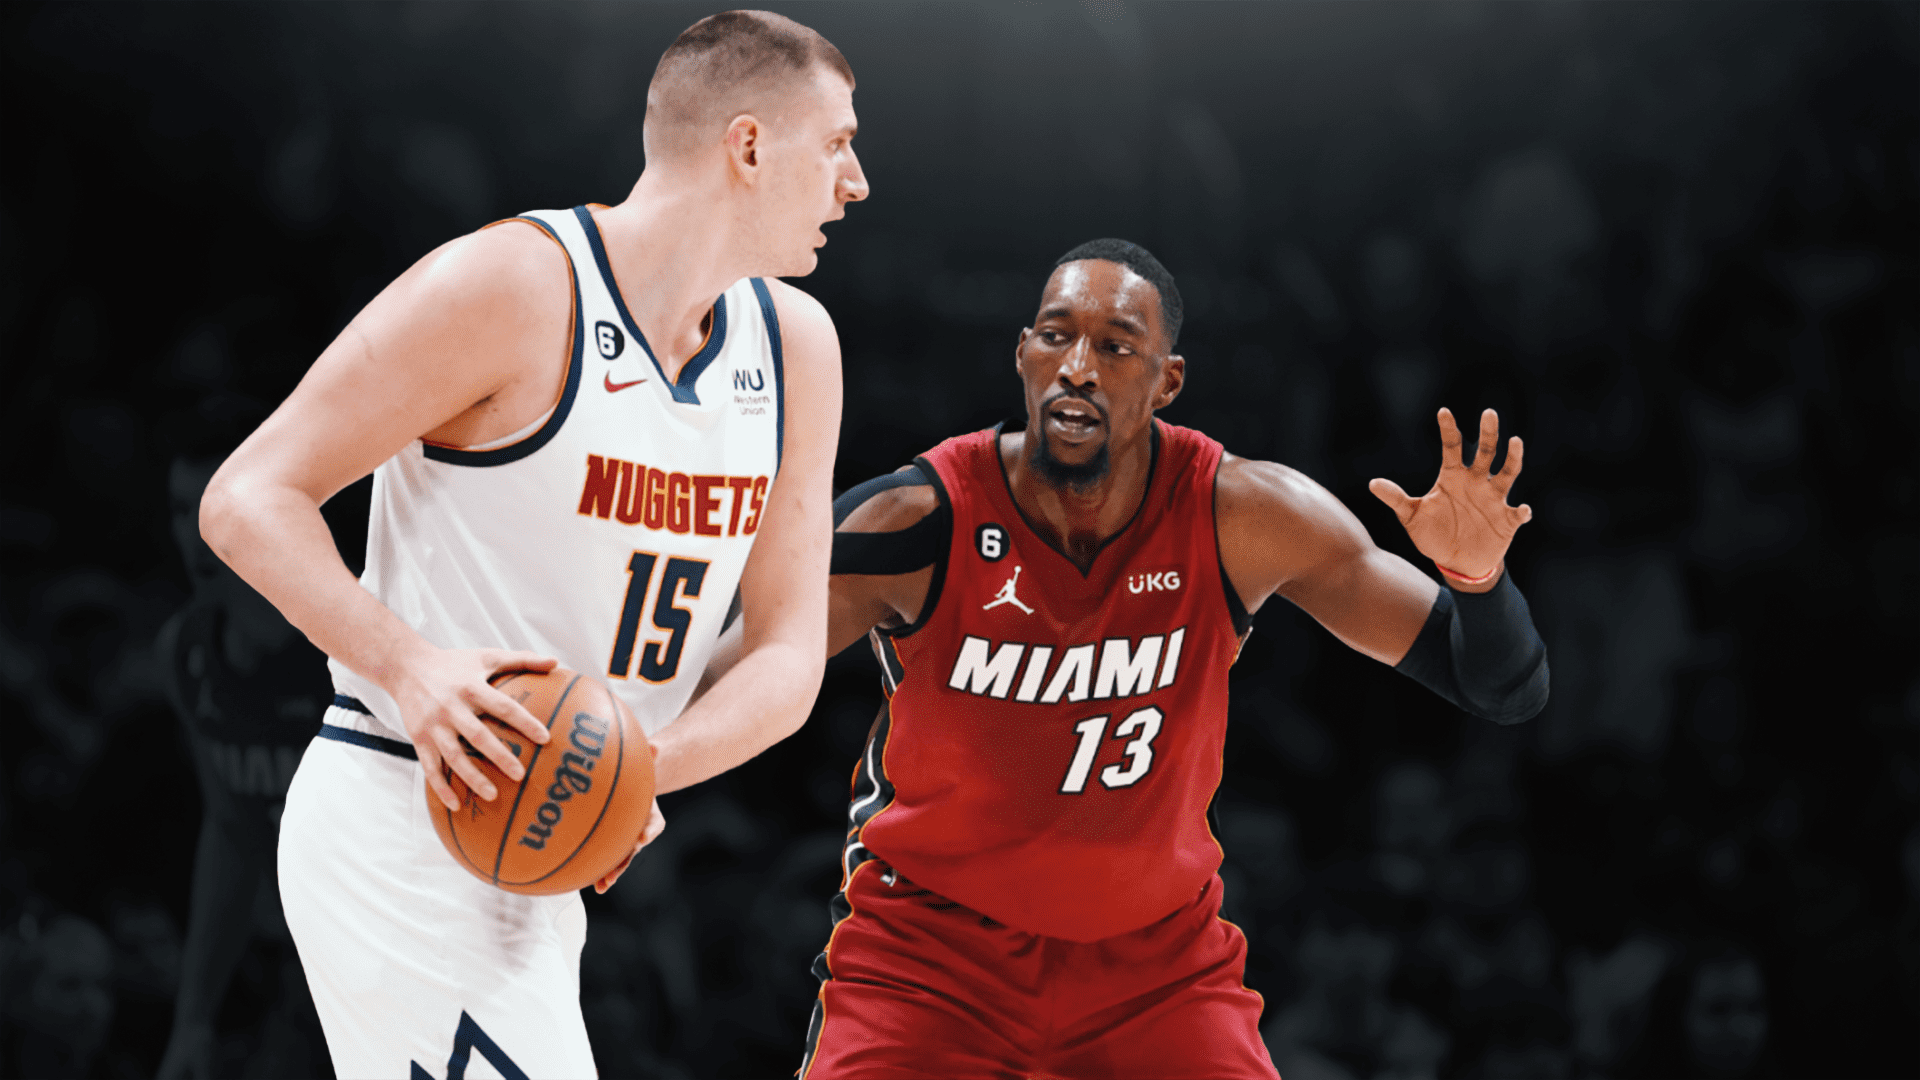 Heat Players Give Their Honest Take on Facing Nikola Jokic in The Finals